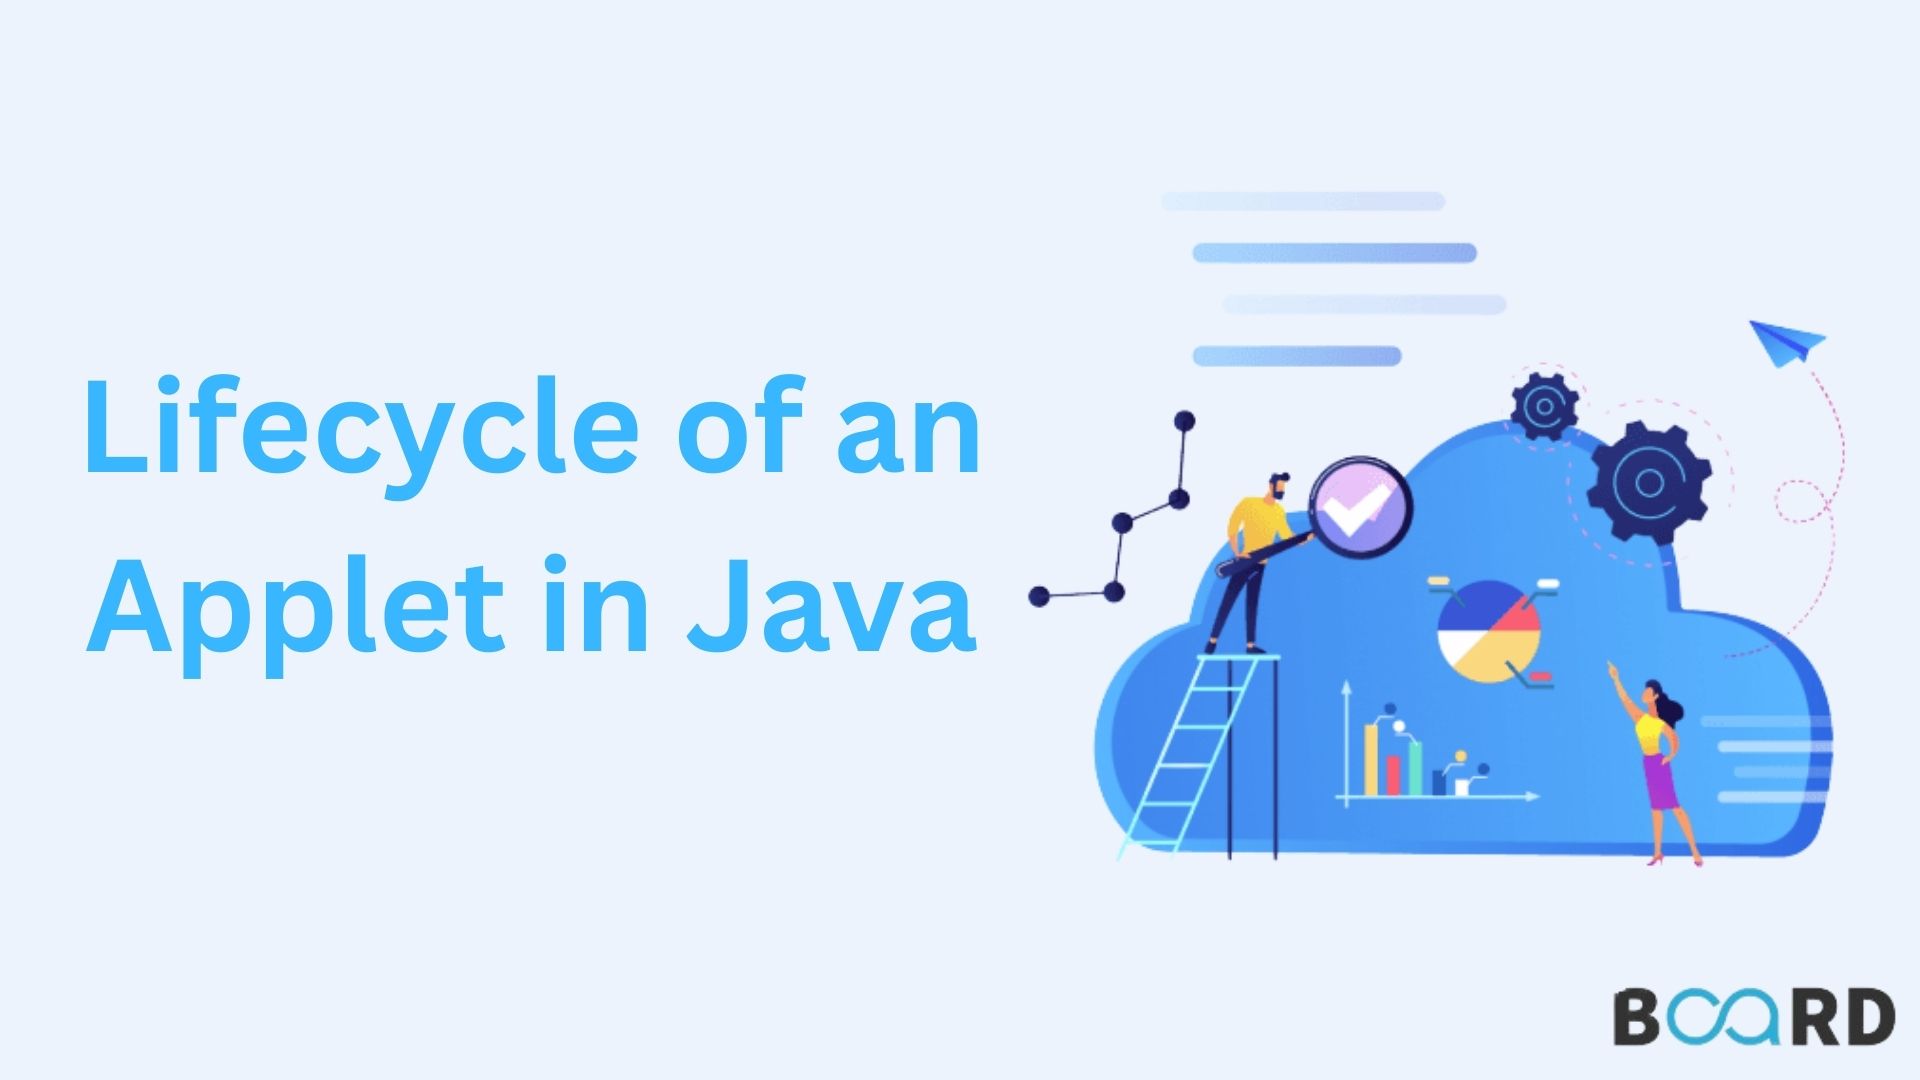 Understanding the LifeCycle of an Applet in Java